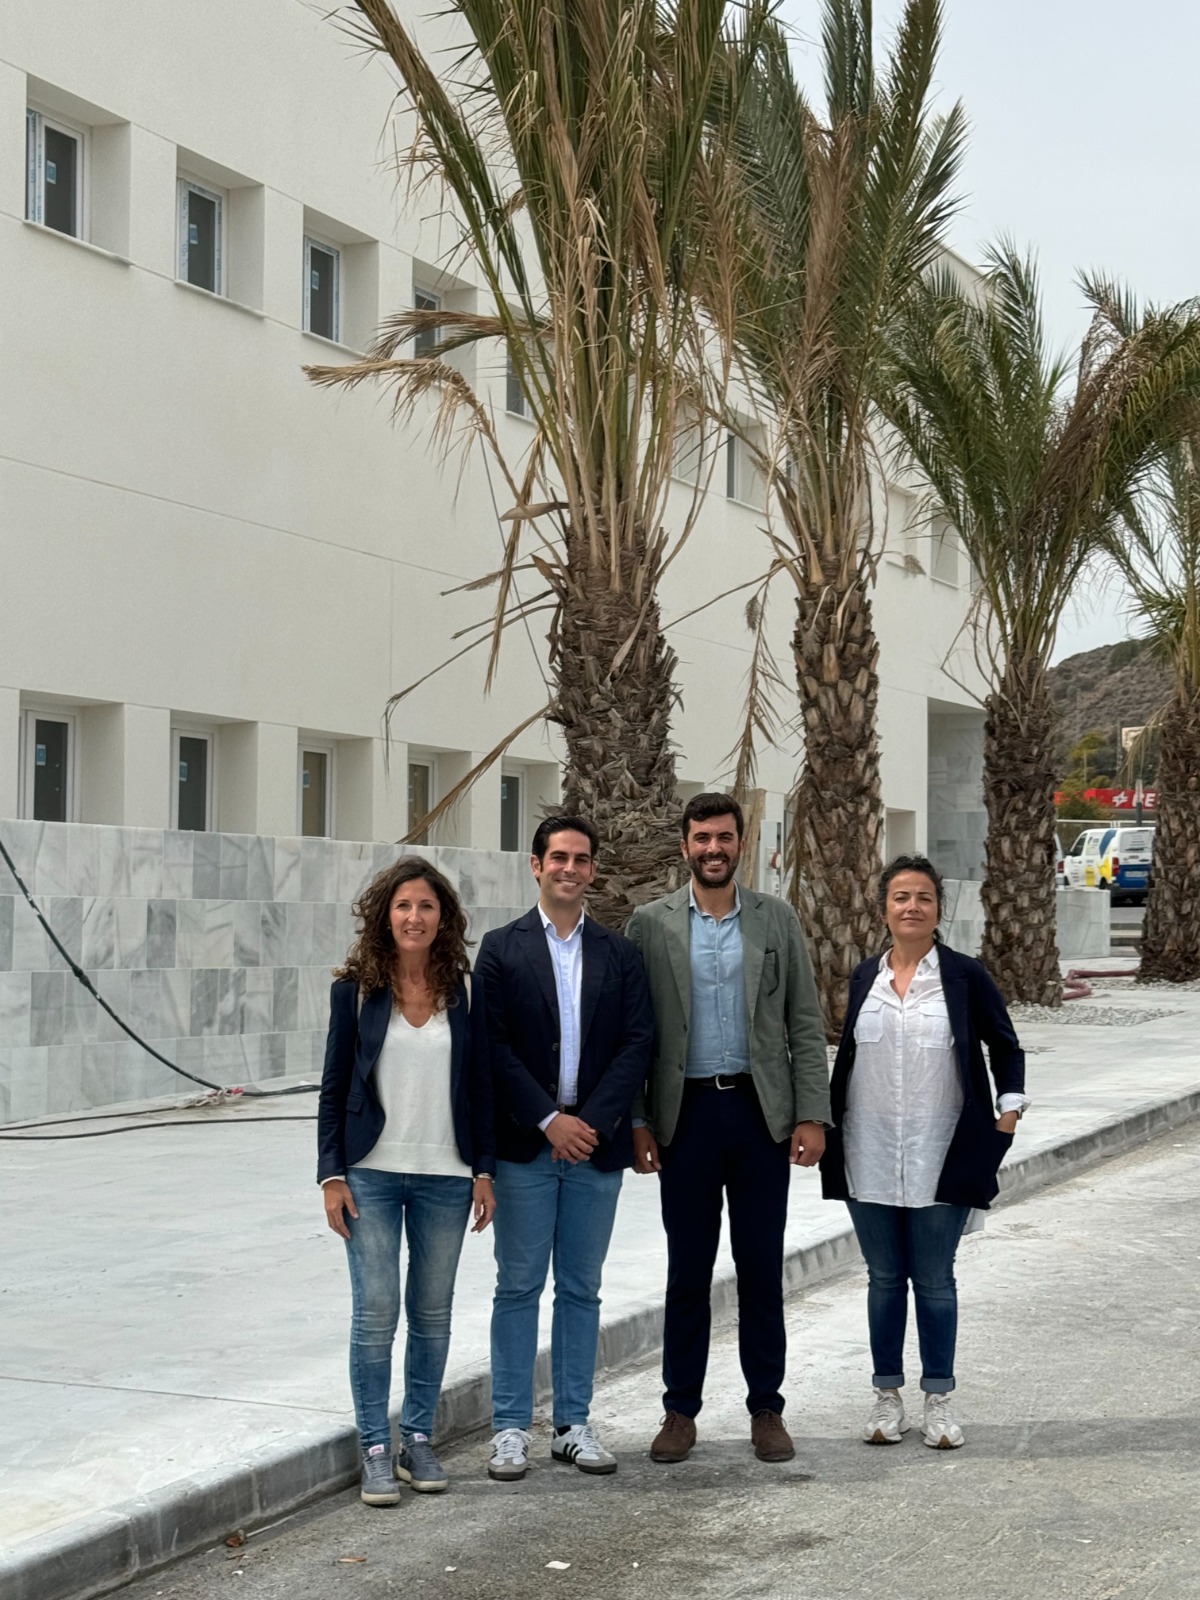 The Mojácar Mayor Francisco García has visited the works of the locality's future health centre to find out about the progress on the building works, which are now close to completion.